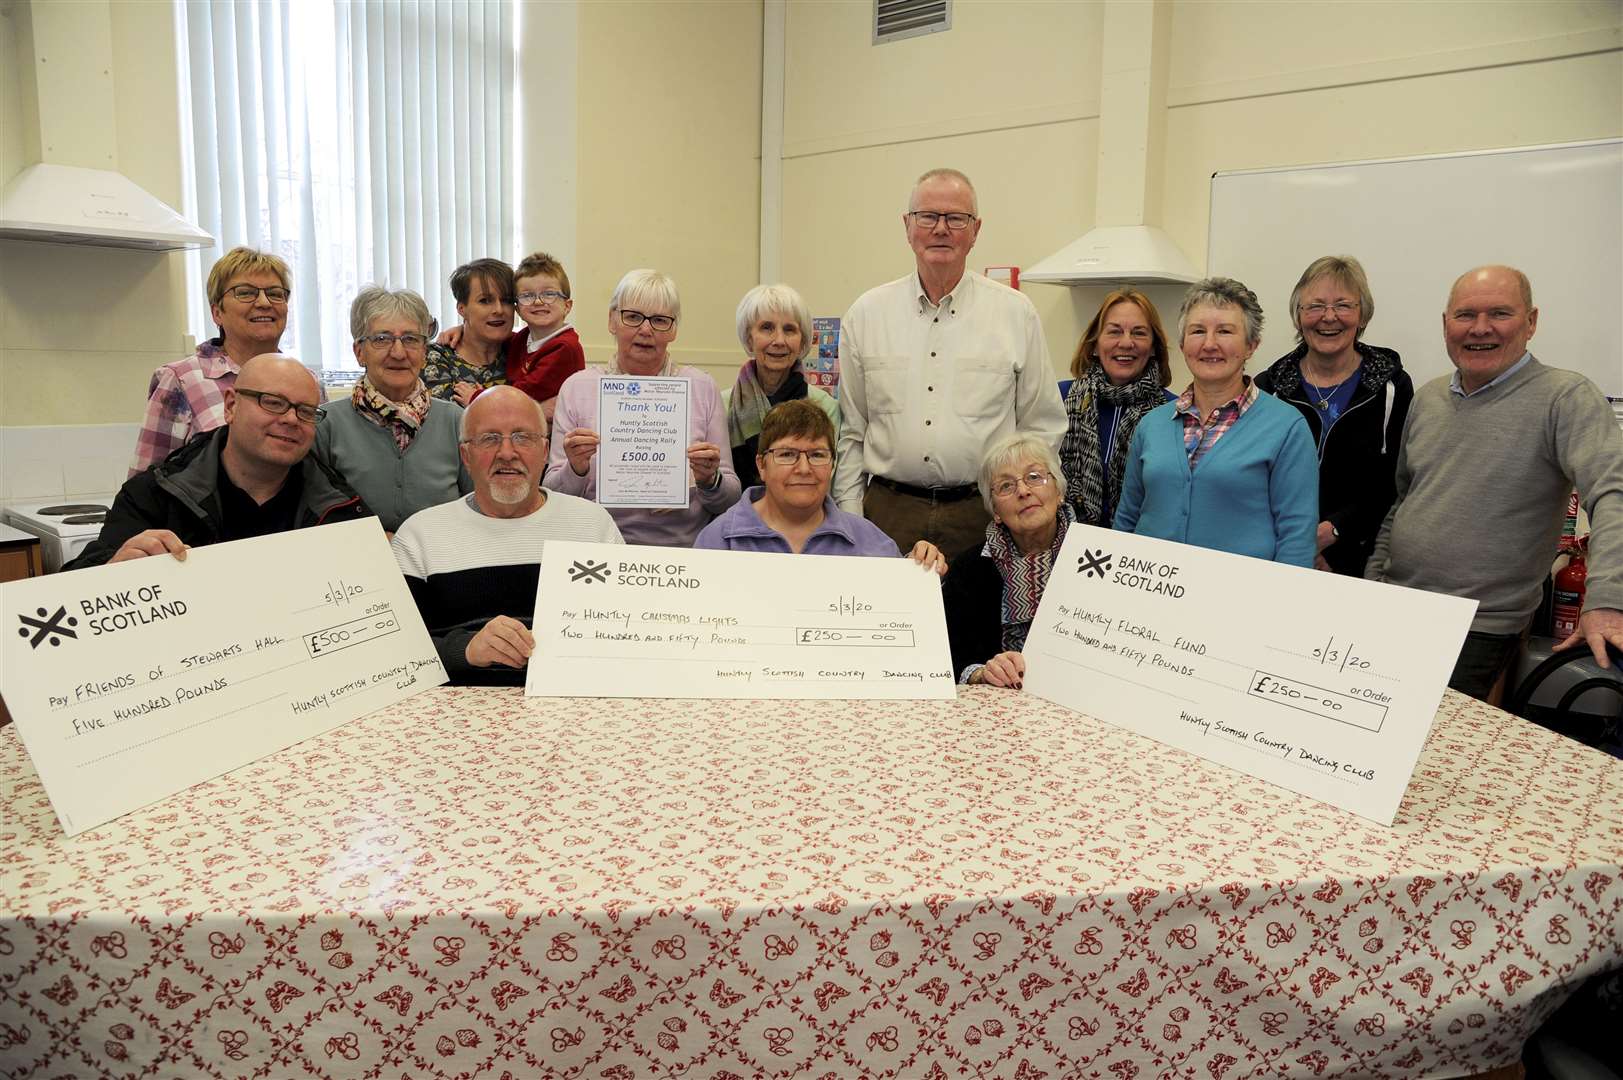 Cheque presentation to Huntly local charities, Stewart's Hall, Christmas Lights and the Floral Fund. Front row l-r: JP Gallagher [Stewarts Hall], Brian Morris [Christmas Lights], Jess McIntosh [Christmas Lights], Jenny Smith [Huntly Floral Club] and Isobell McGregor [centre], MND Scotland.